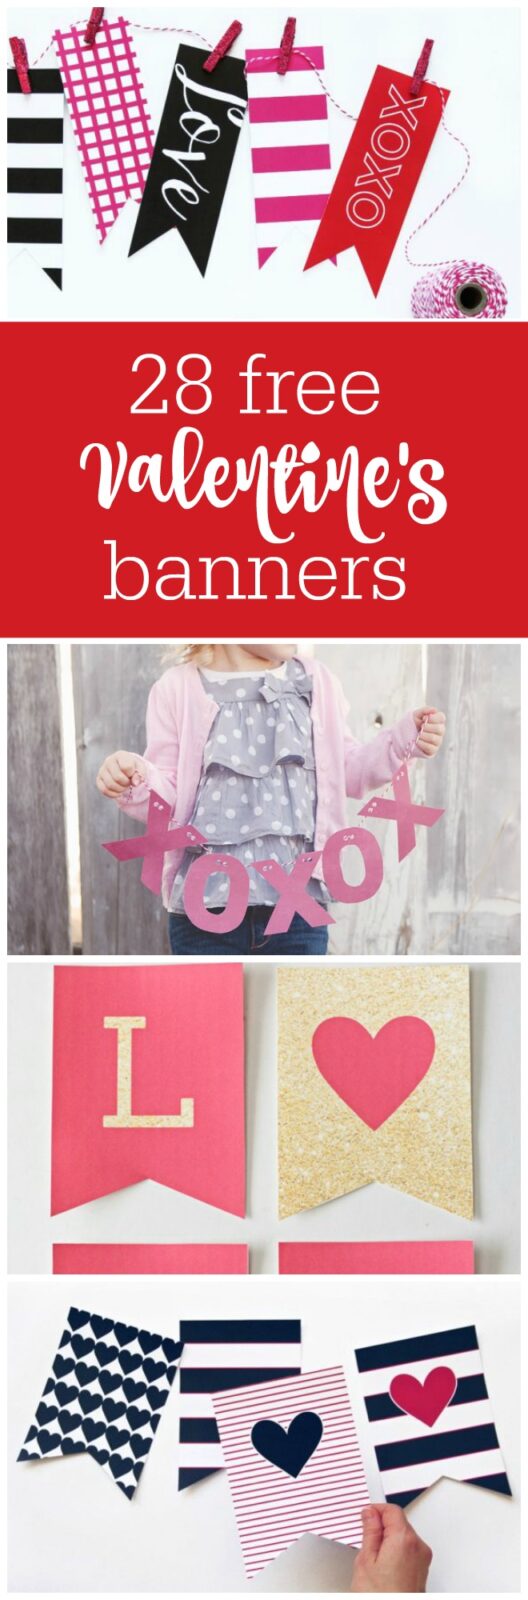 28 free Valentine's Day printable banners curated by The Party Teacher